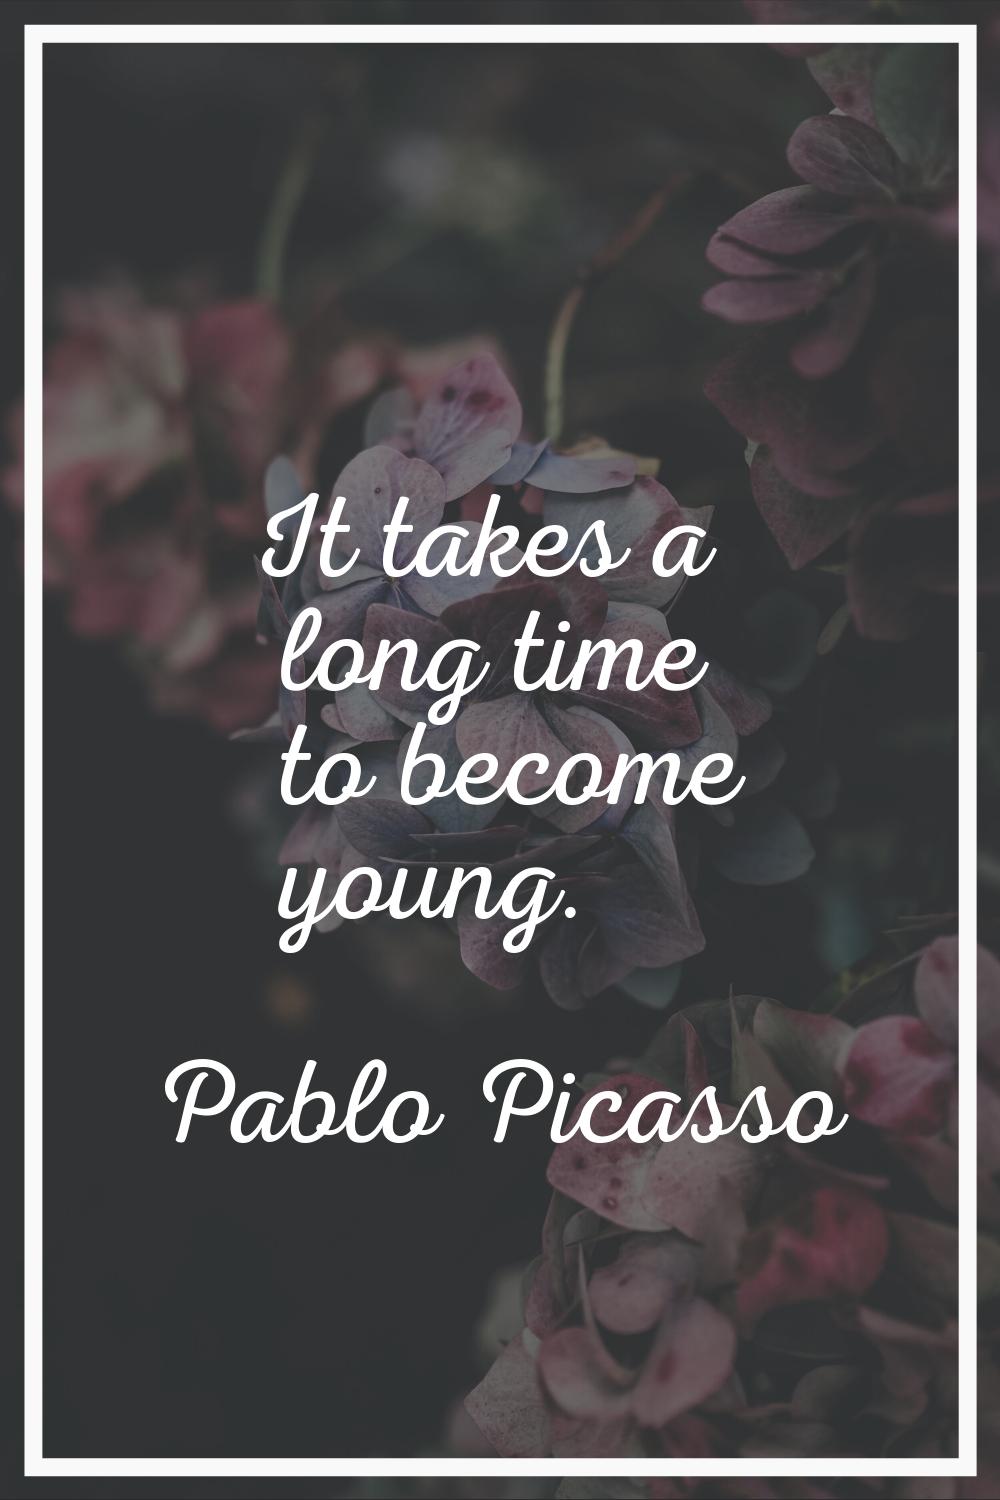 It takes a long time to become young.